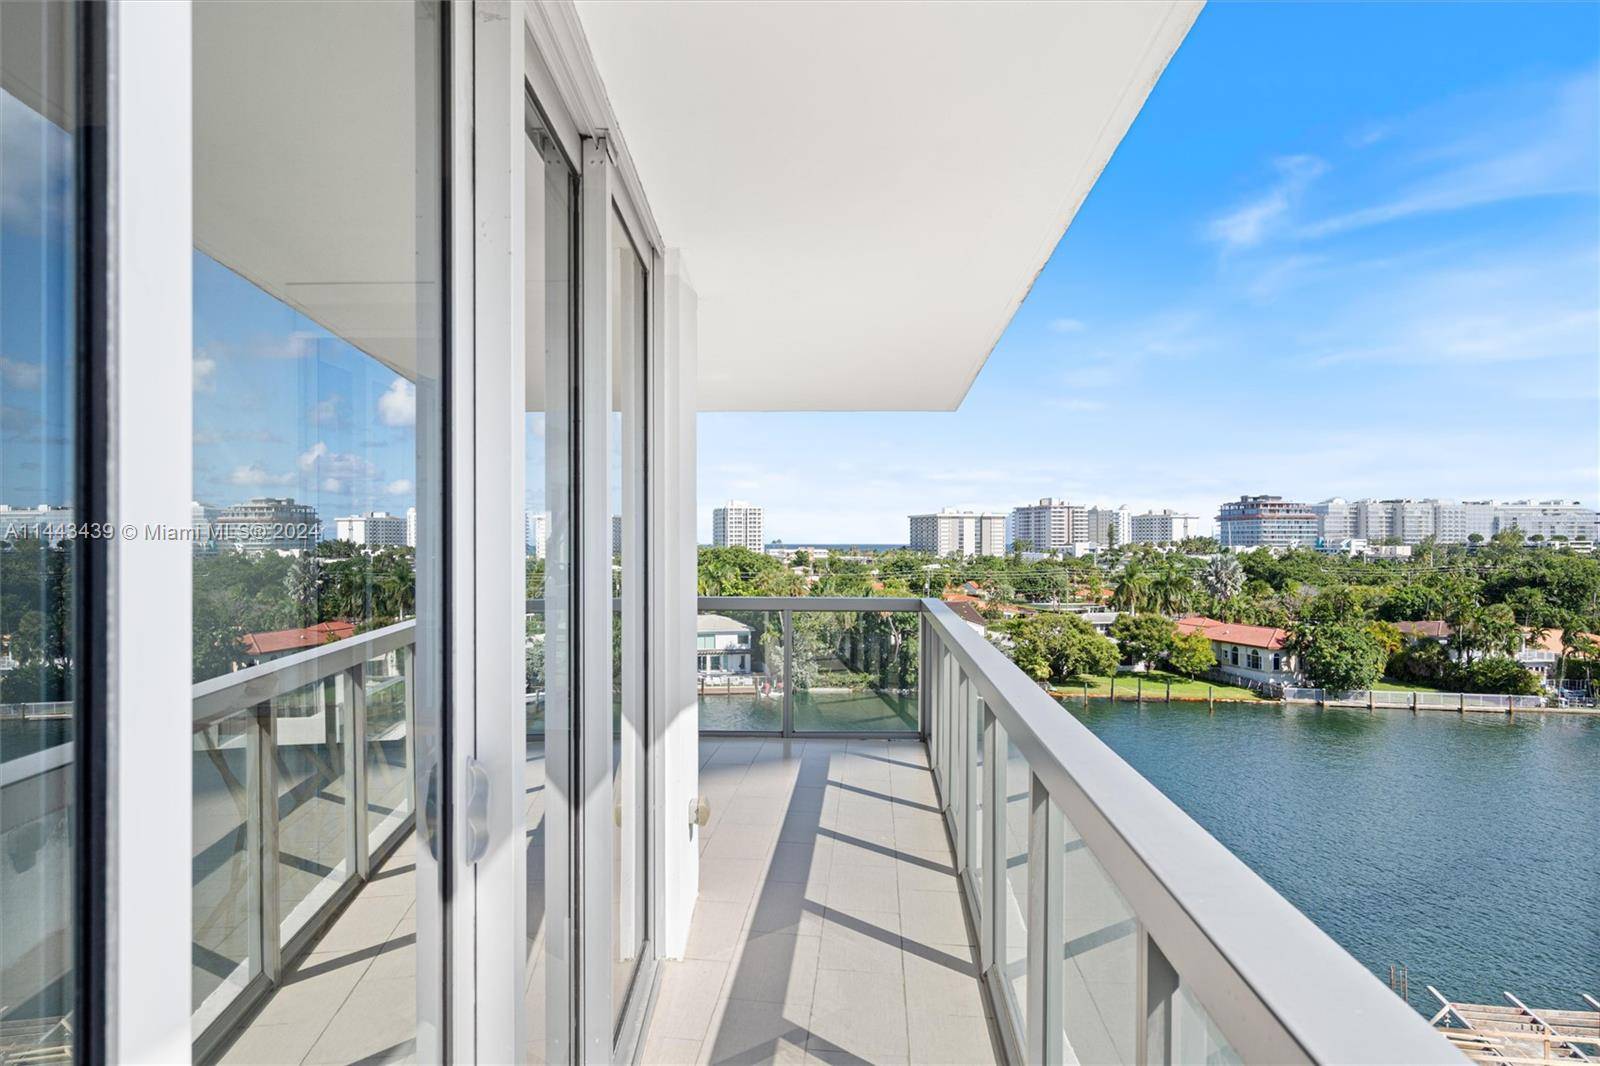 Fabulous turn key pied a terre or full time residence in waterfront boutique building with rooftop pool, jacuzzi, gym and lobby attendant.